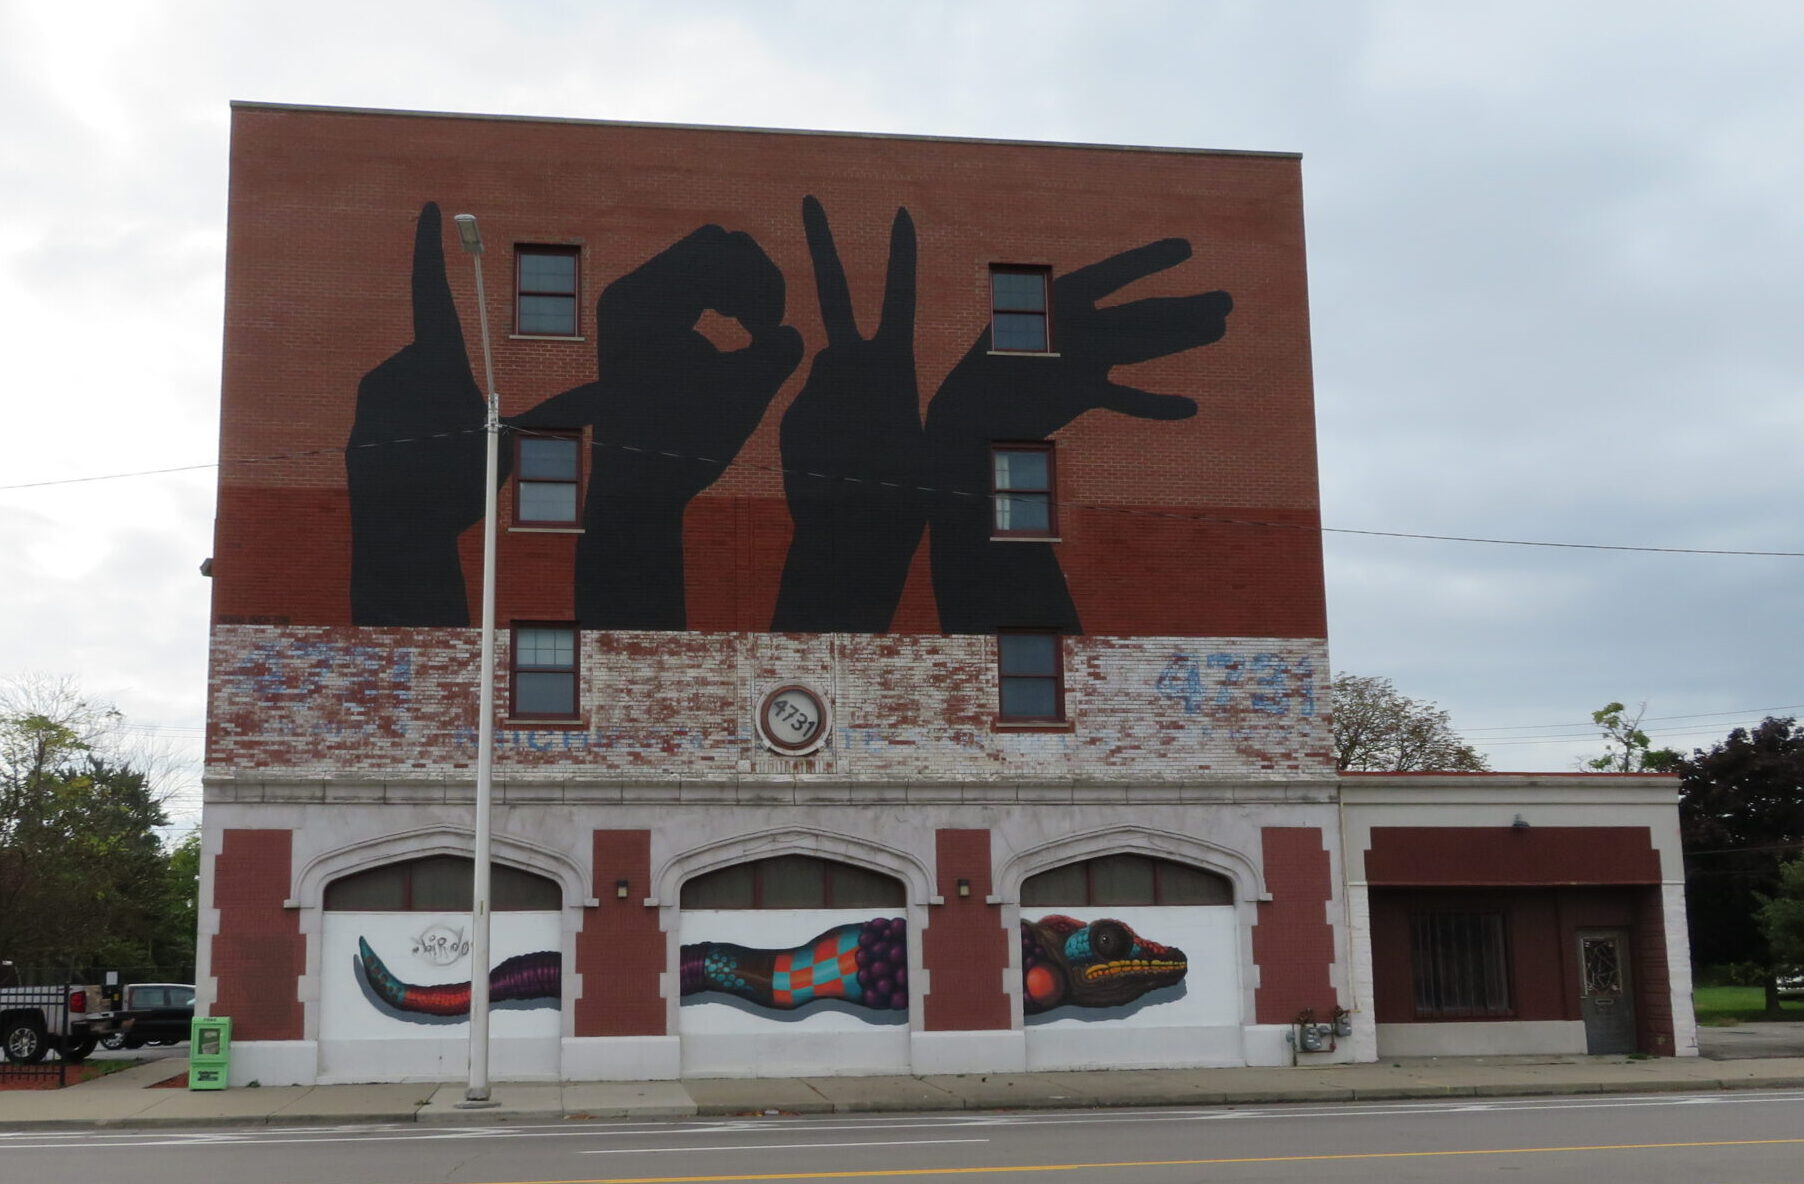 Photo of the LOVE Building at 4731 Grand River, Detroit. A four-story brick building painted with the word "LOVE" spelled out using hands.